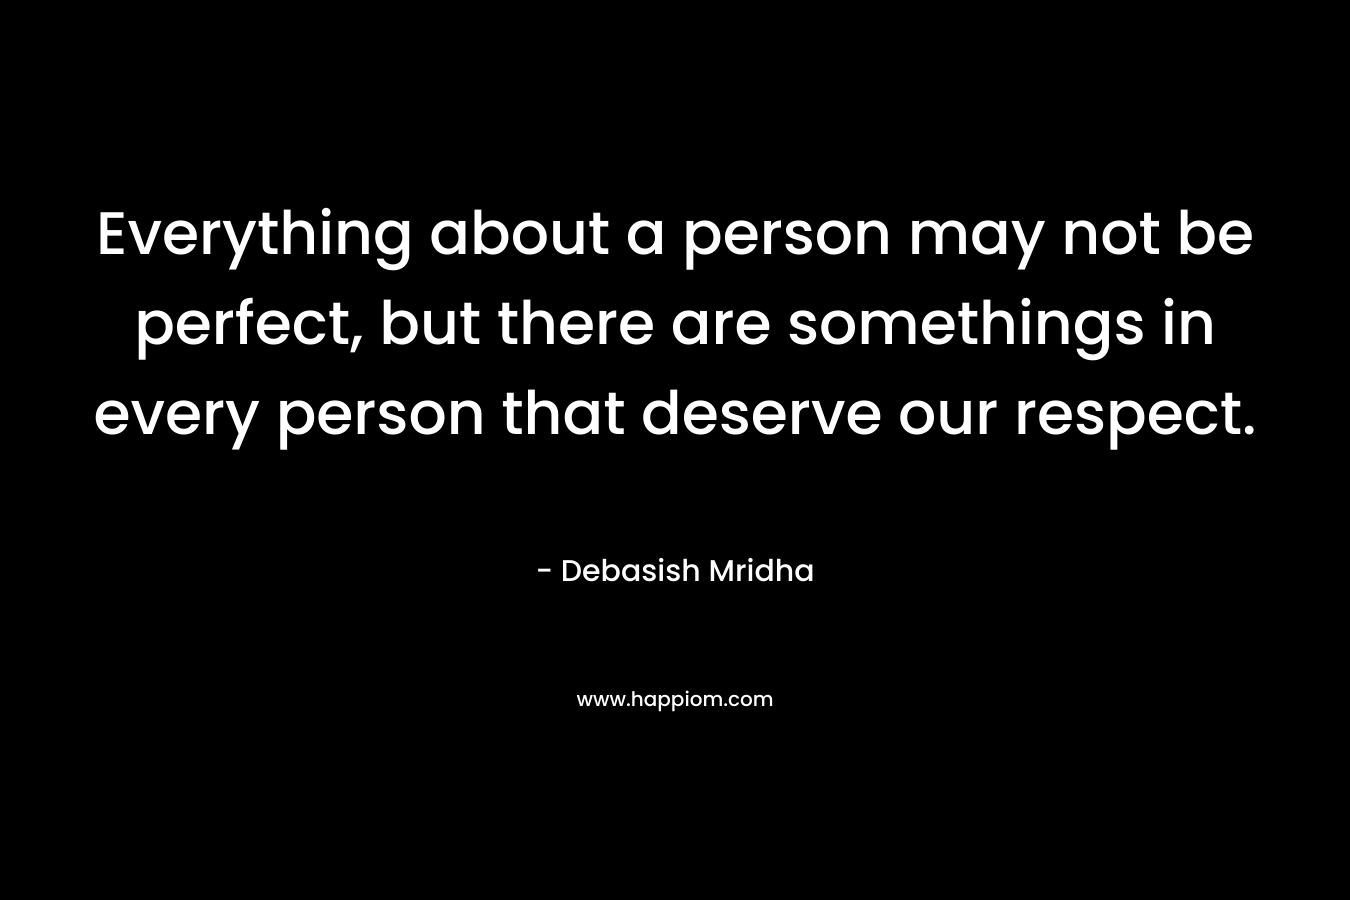 Everything about a person may not be perfect, but there are somethings in every person that deserve our respect.